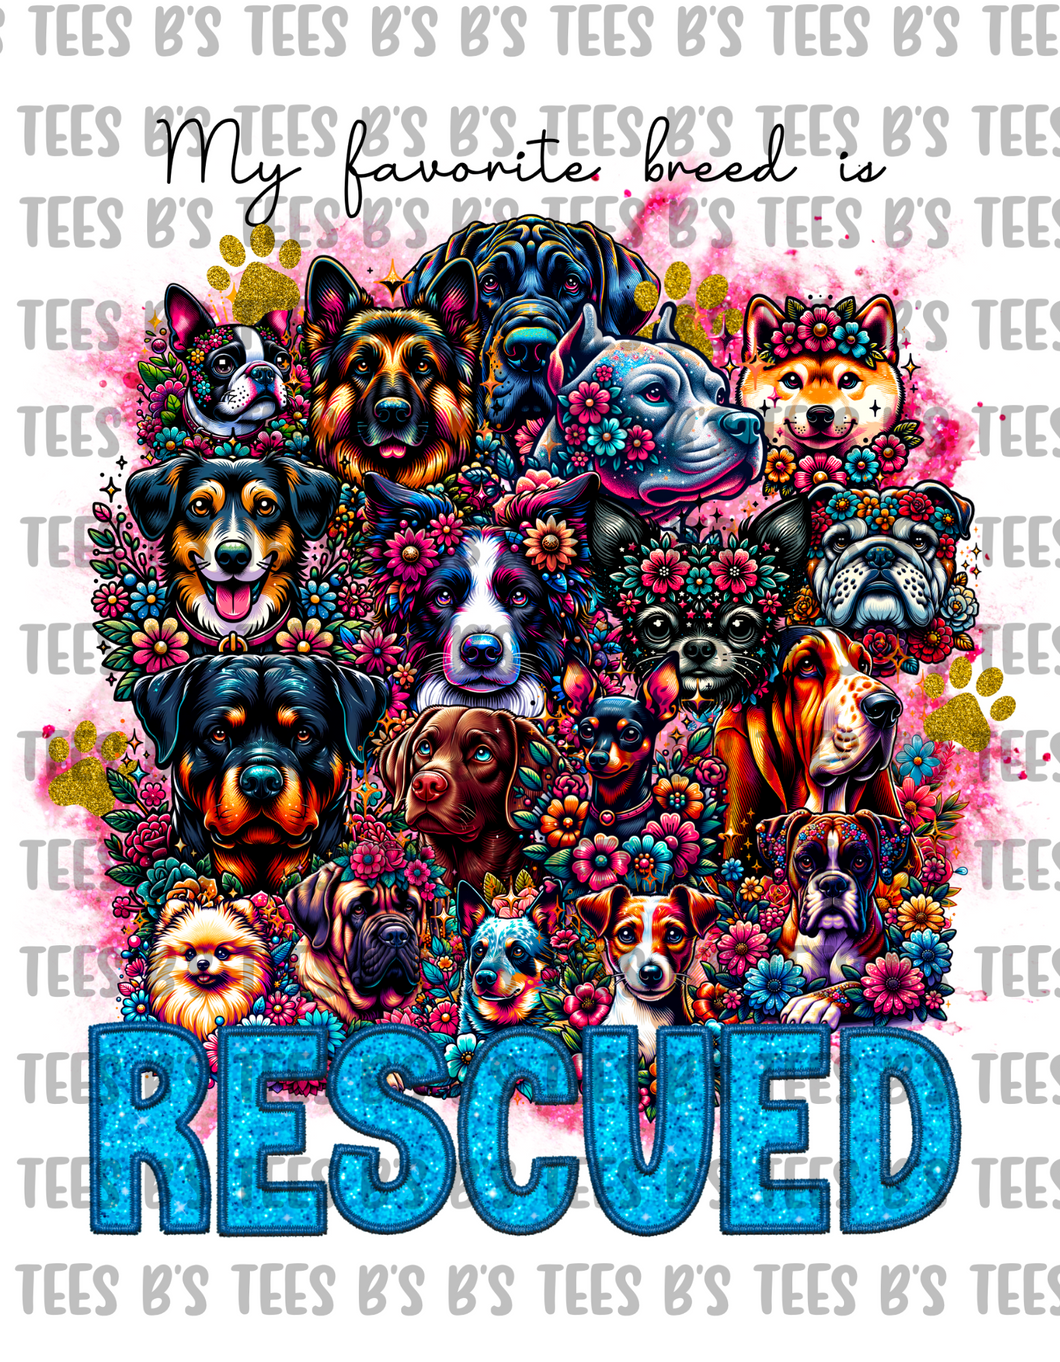 My Favorite Breed is Rescued